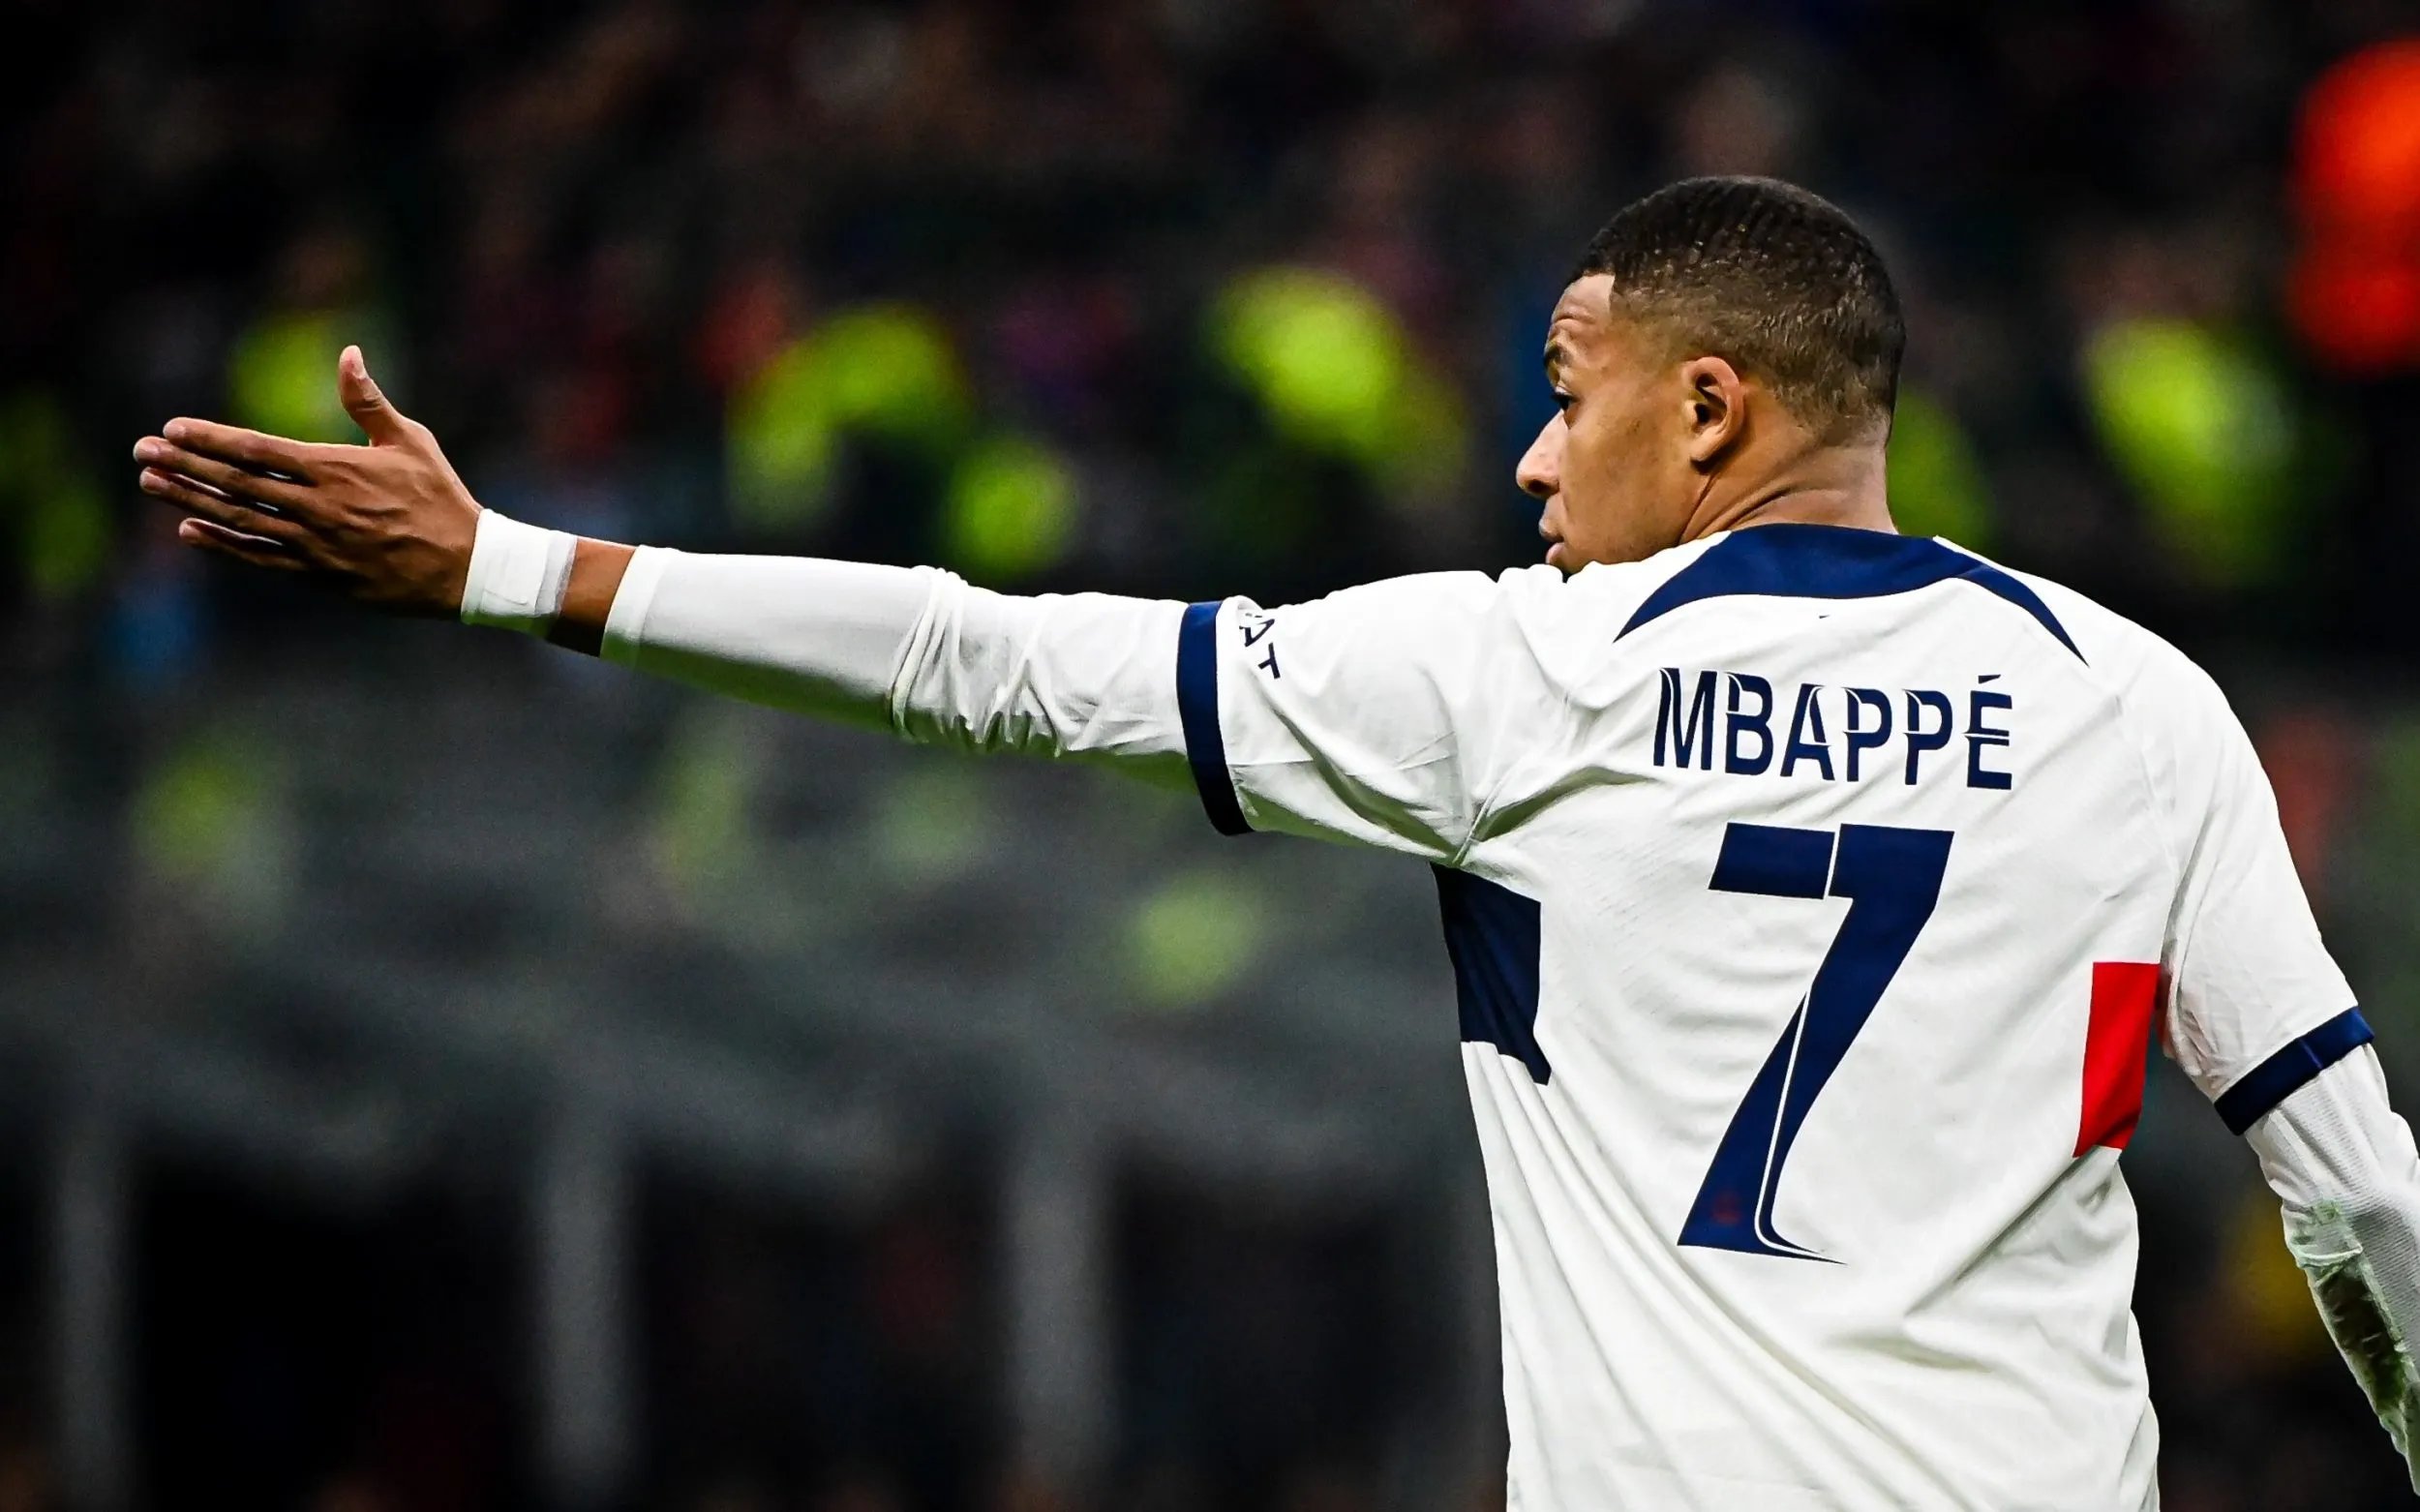 Where would Mbappe fit in Real Madrid's system? - sportzpoint.com